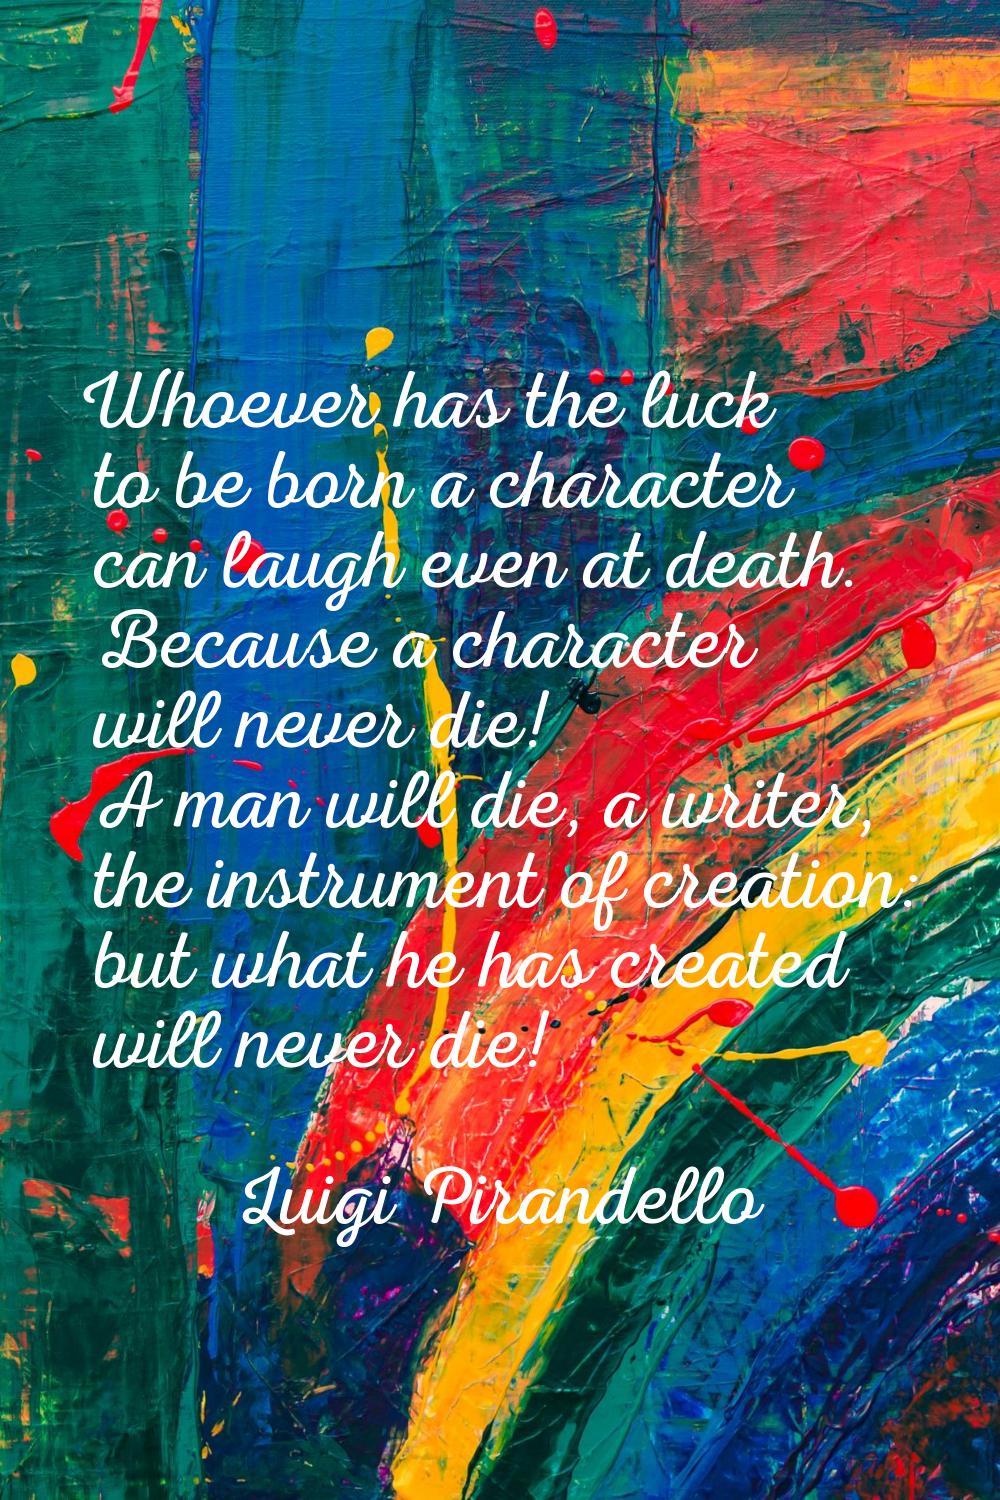 Whoever has the luck to be born a character can laugh even at death. Because a character will never